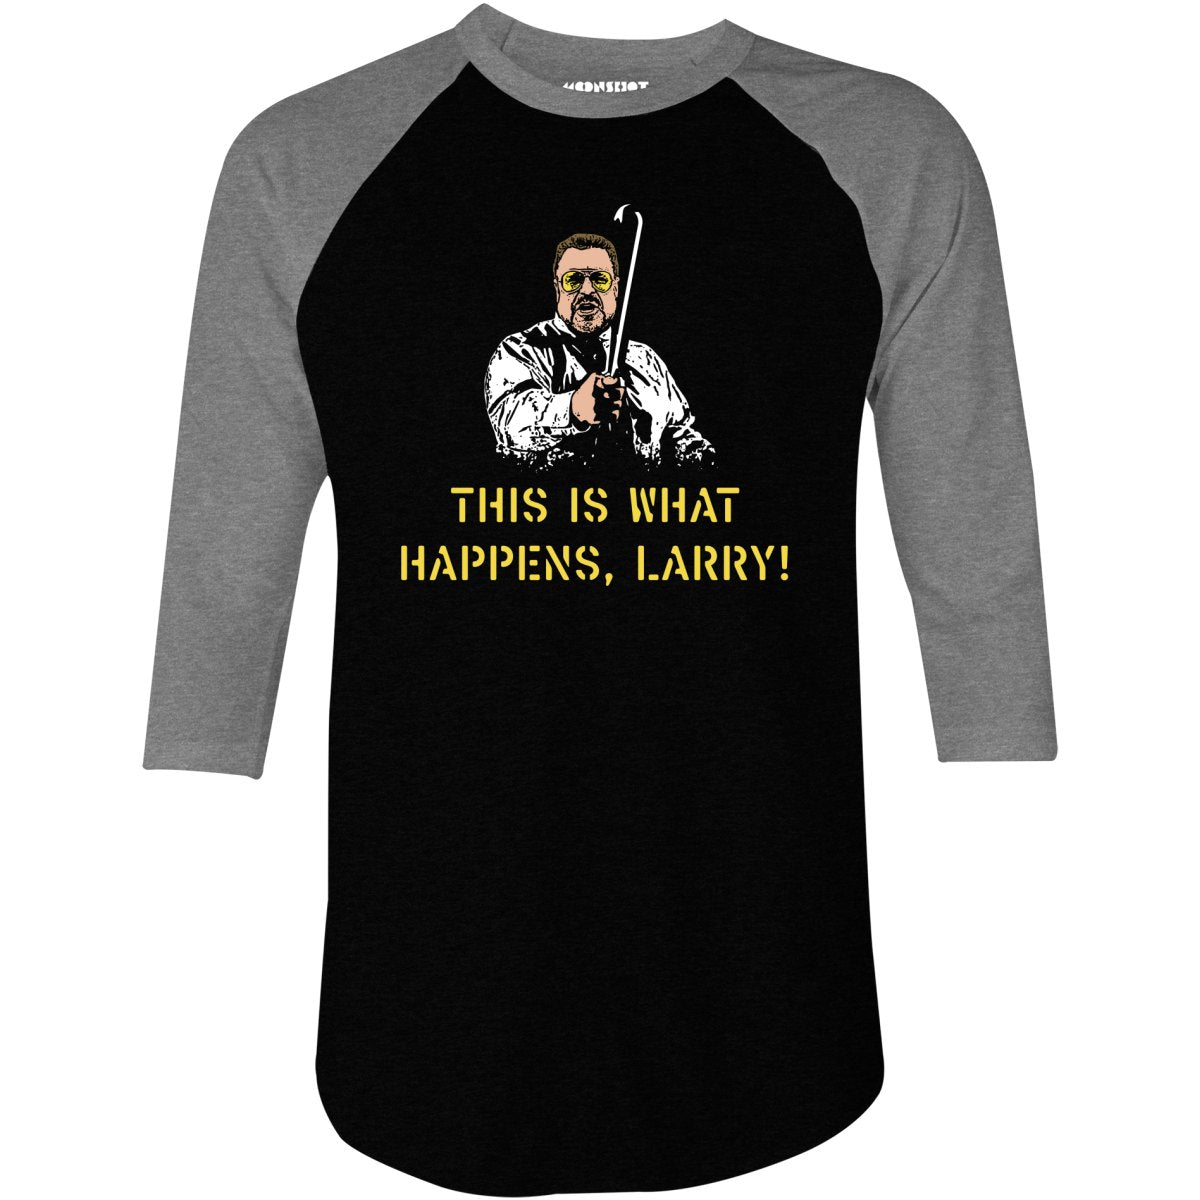 This is What Happens, Larry - 3/4 Sleeve Raglan T-Shirt